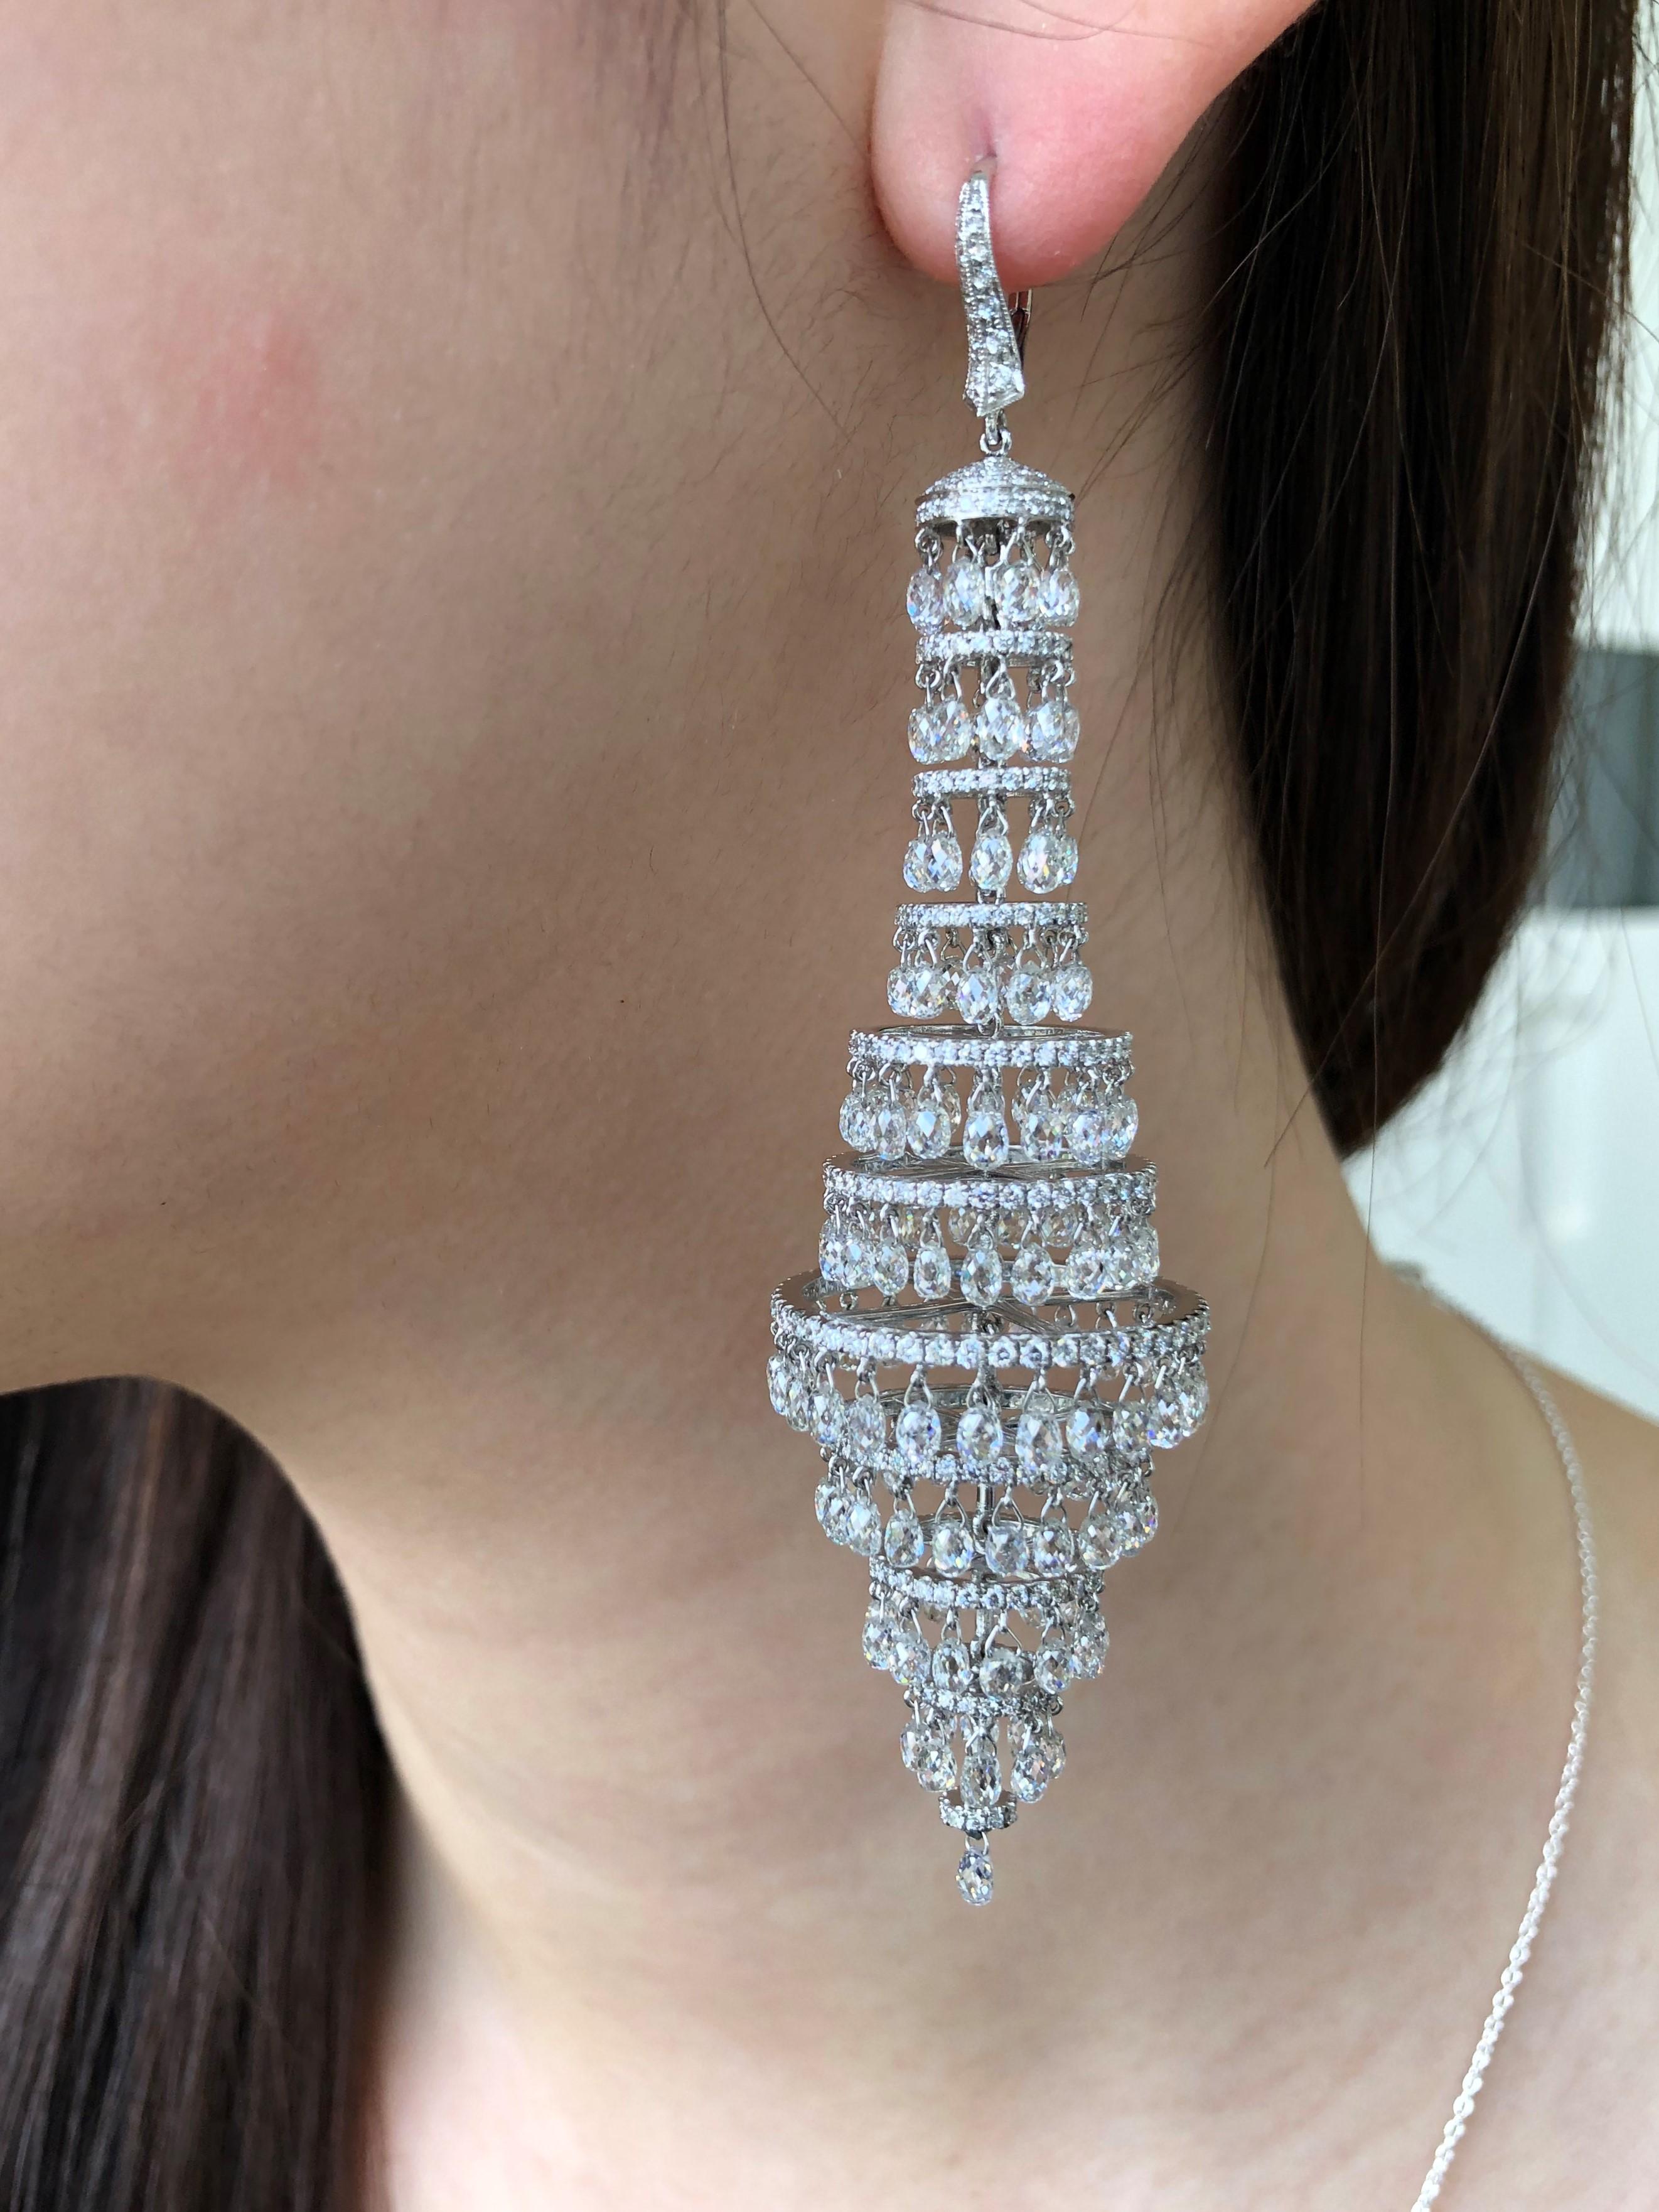 JR 41.70 carats Diamond Briolette Chandelier Earring

Our Briolettes chandelier earring is charming & sensational. It frames the face just right without overpowering and amplifies your beauty.

Diamond Weight : 41.70 carats
Length approx :